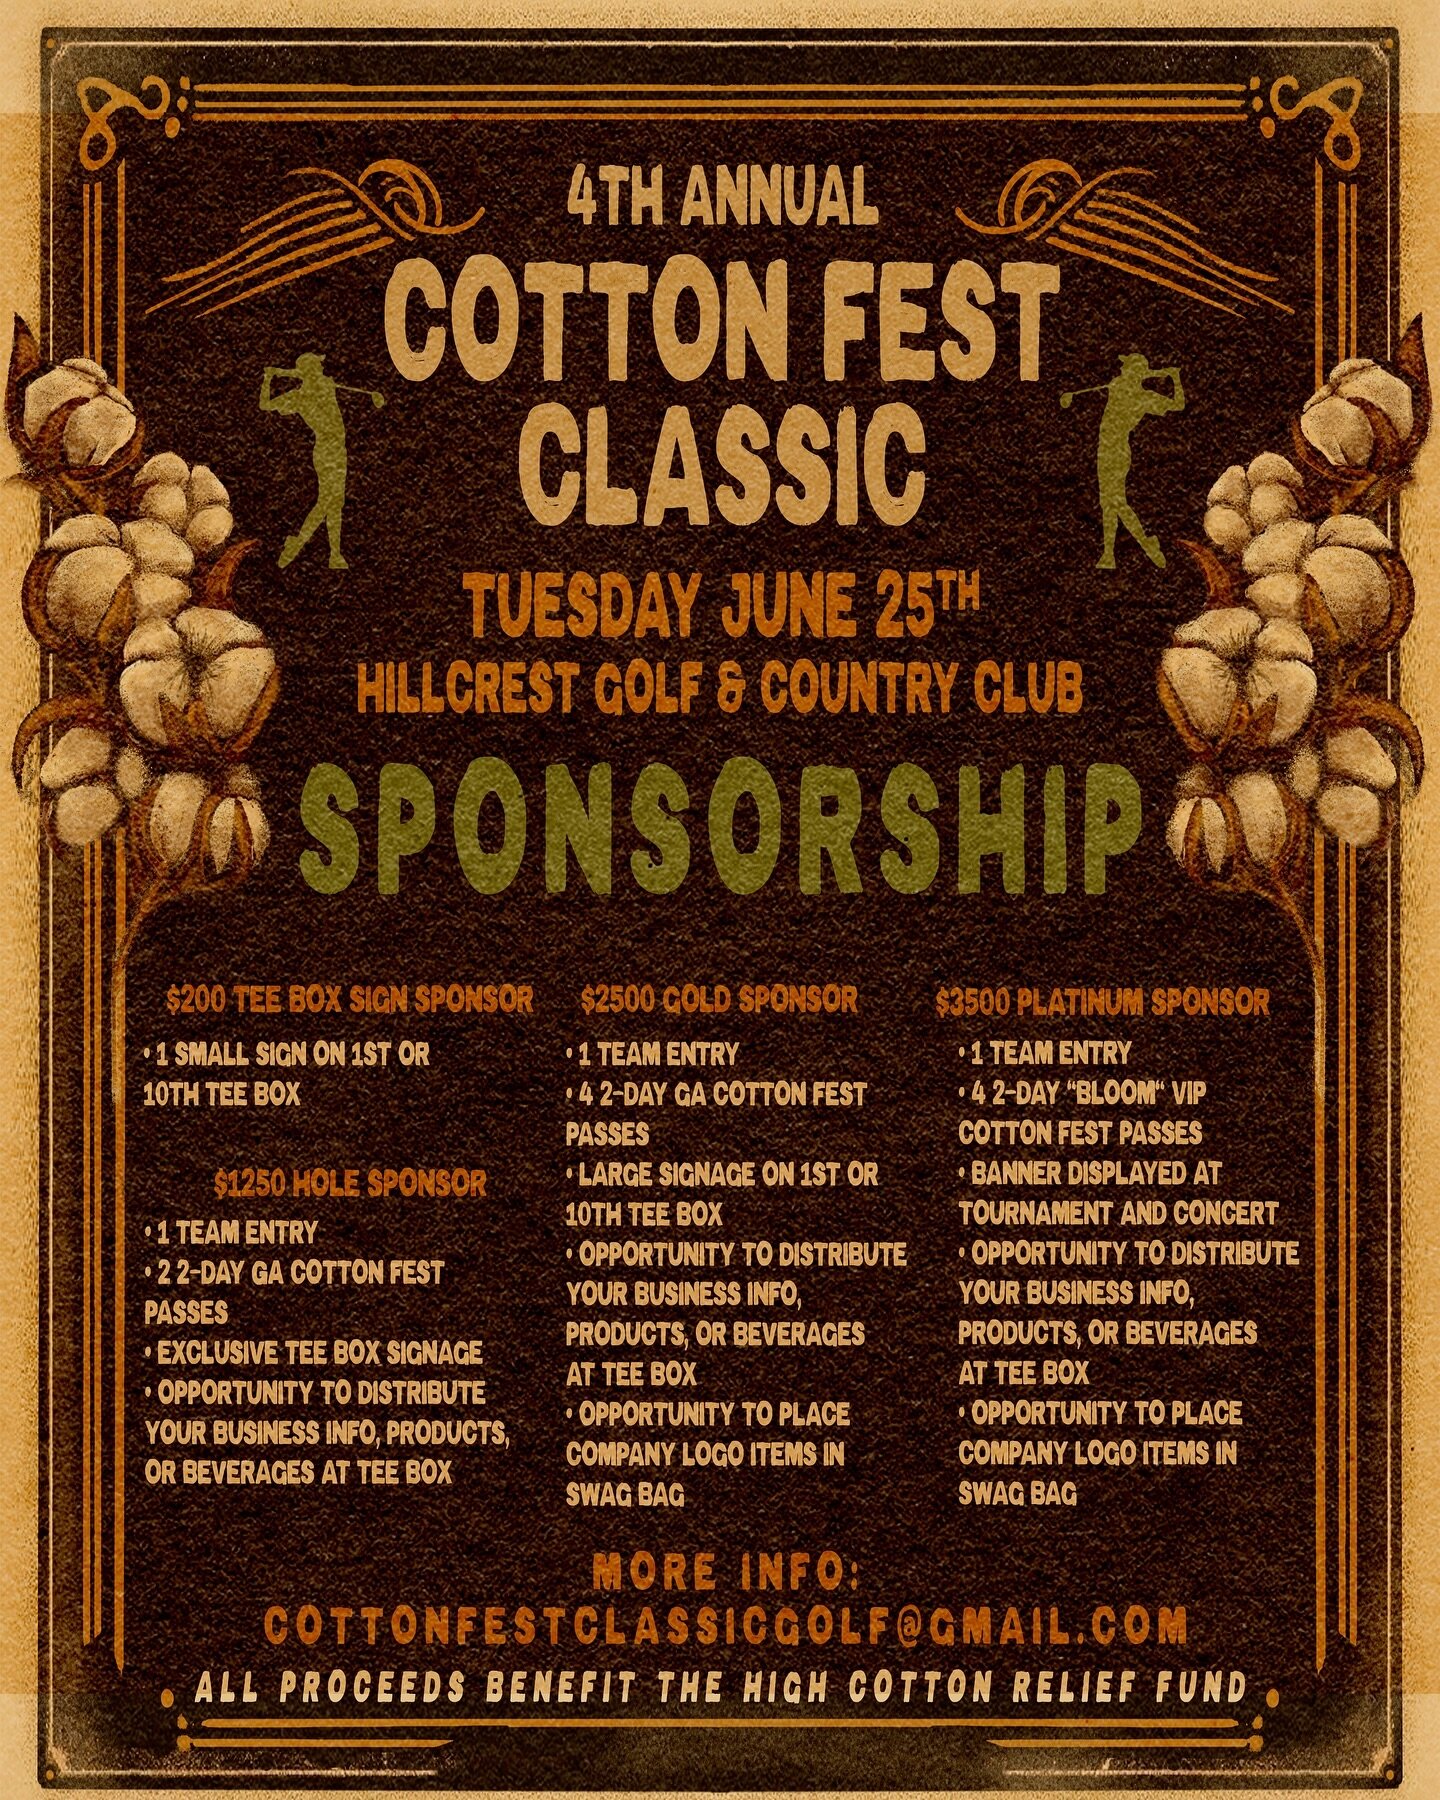 Interested in sponsoring this year&rsquo;s golf tournament? Check out our sponsor opportunities &amp; email cottonfestclassicgolf@gmail.com for more info!